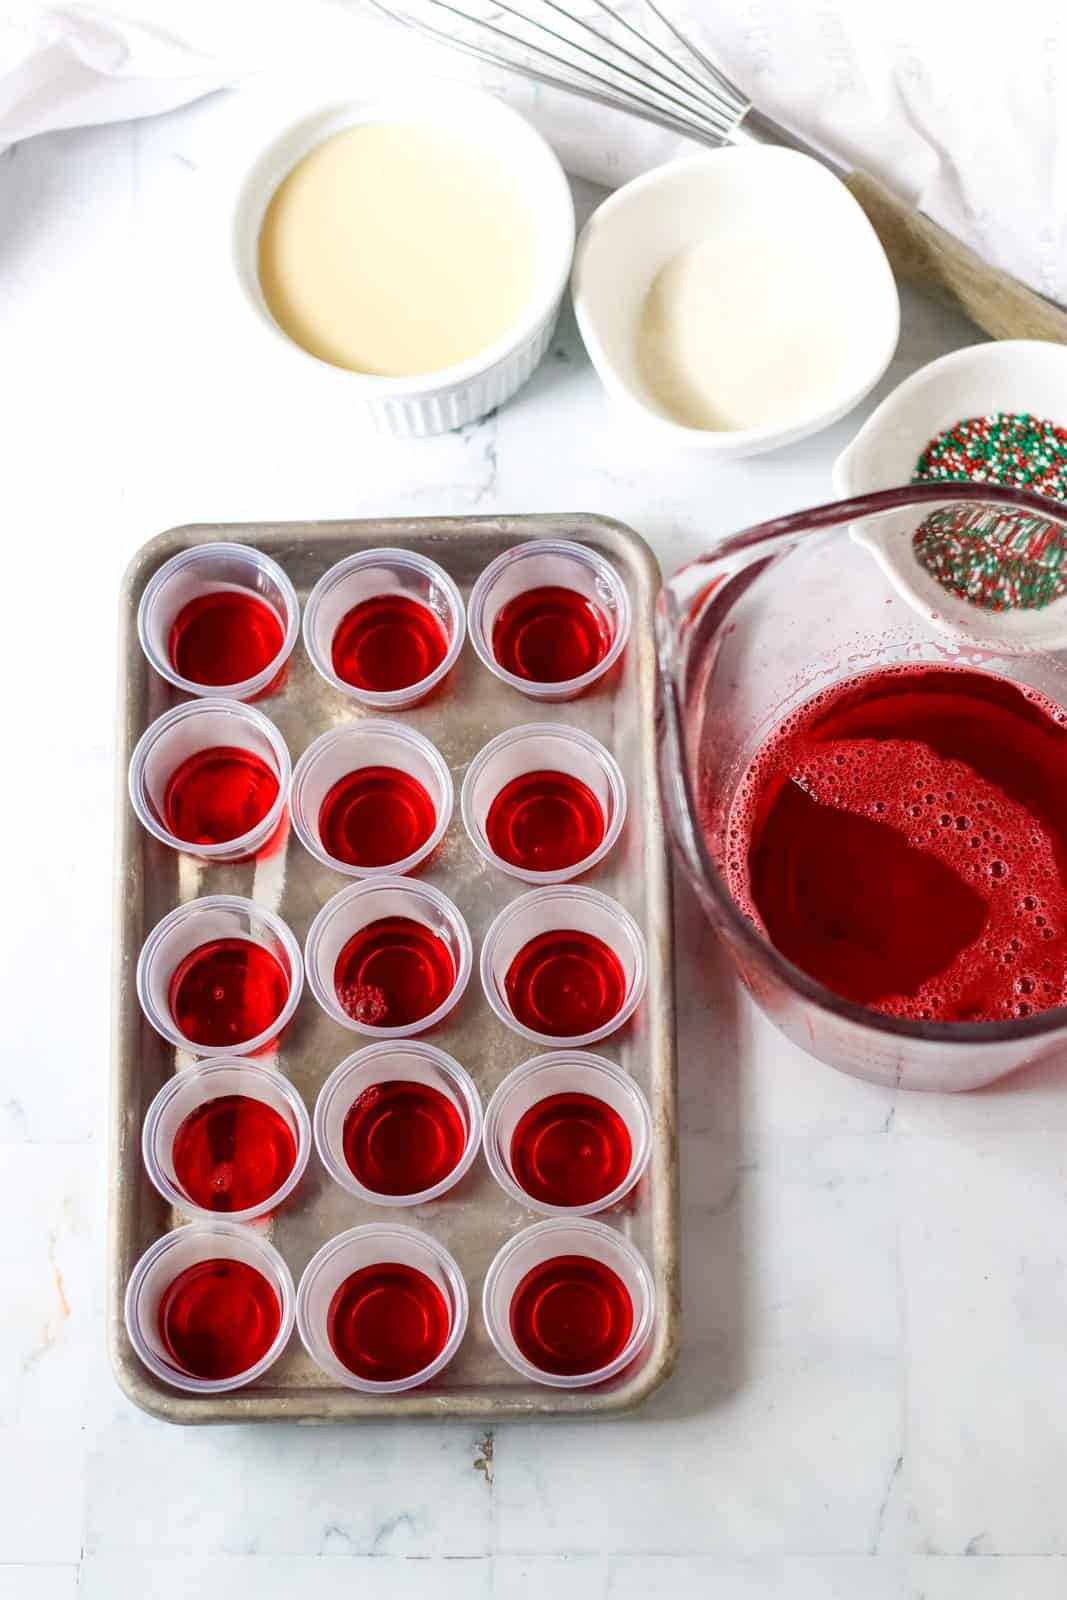 Red Jell-O layer mixed together and poured into cups on tray.